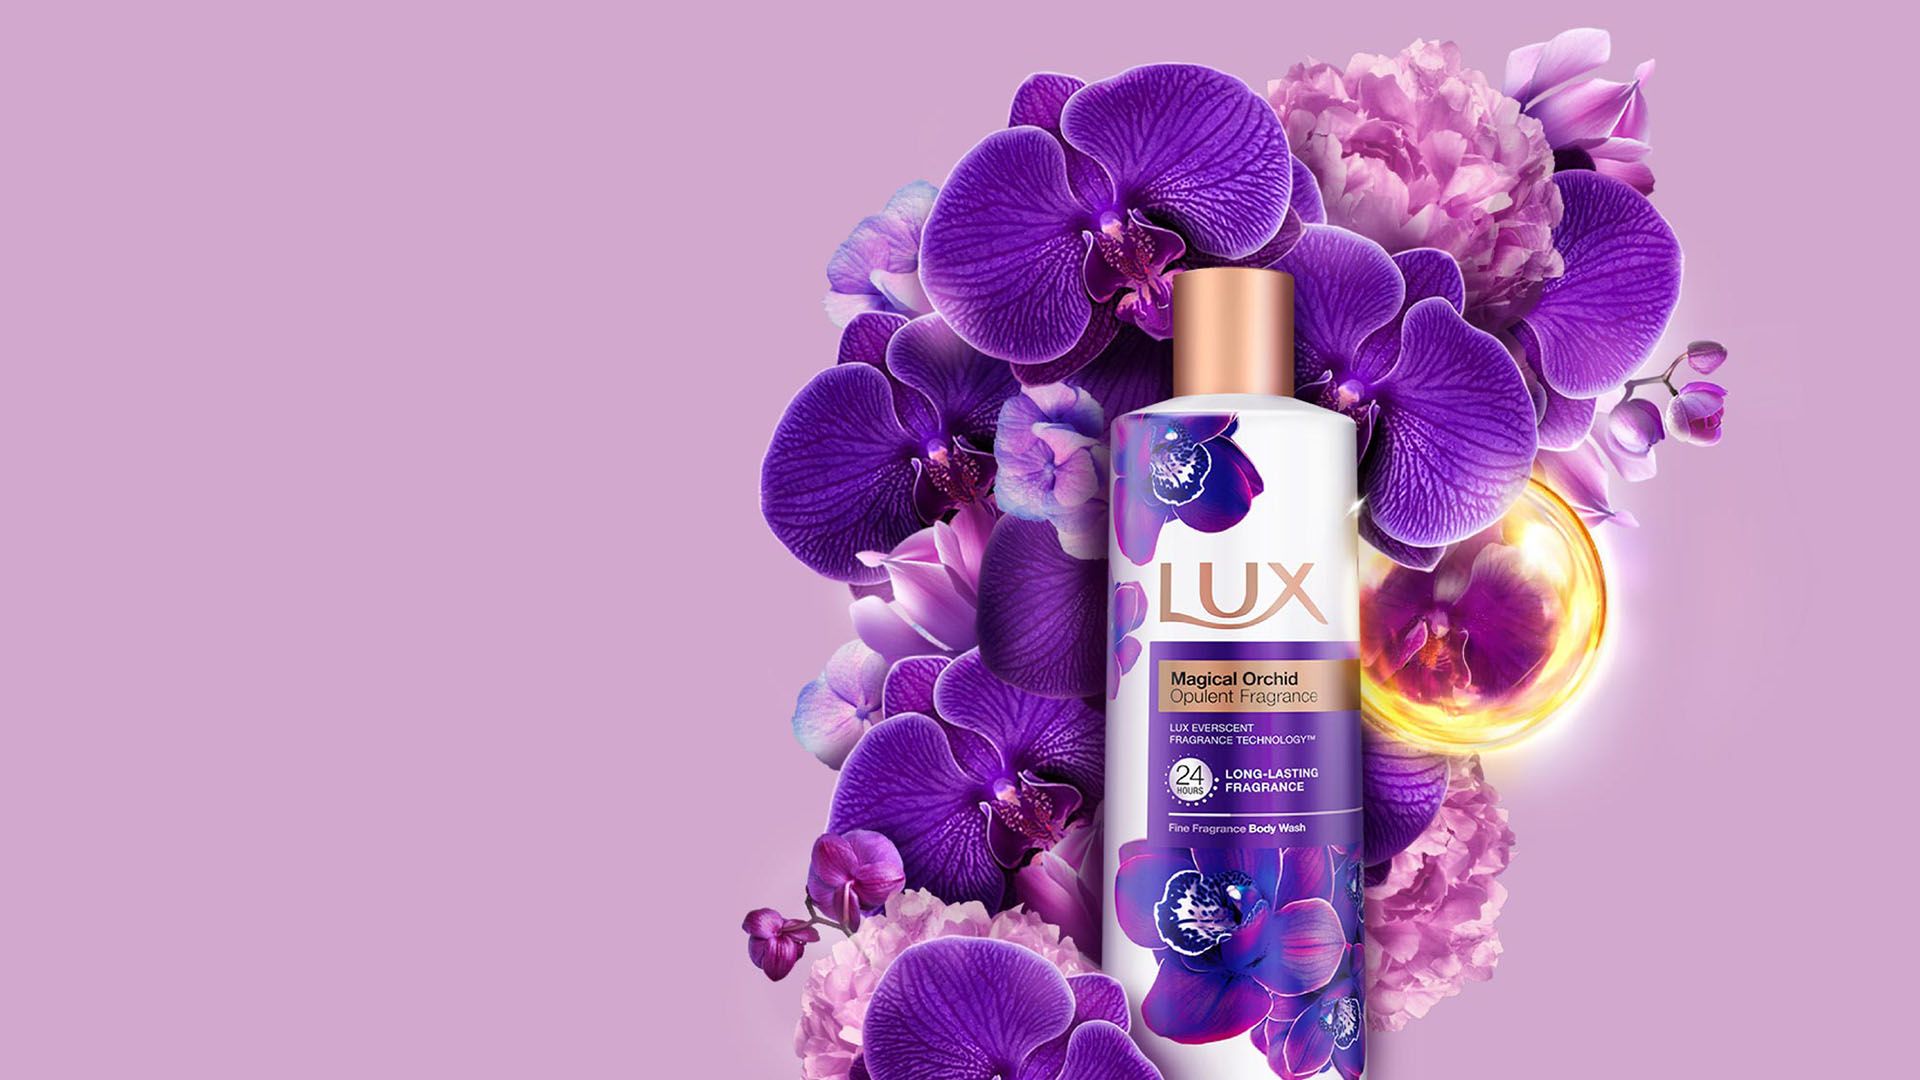 Lux product display